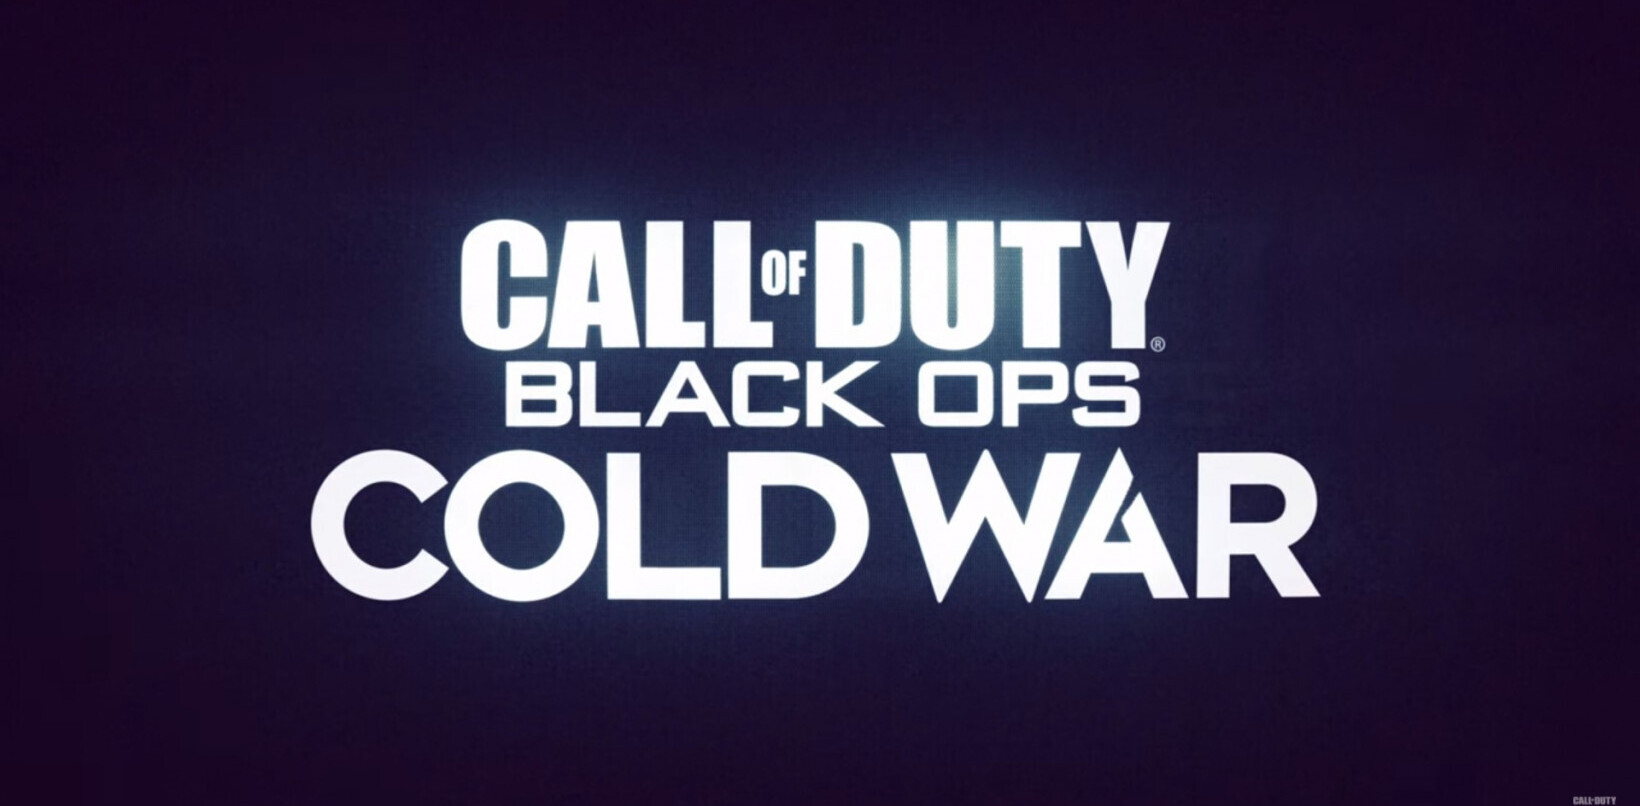 Activision is handing out 10,000 beta keys for Call of Duty: Black Ops Cold War